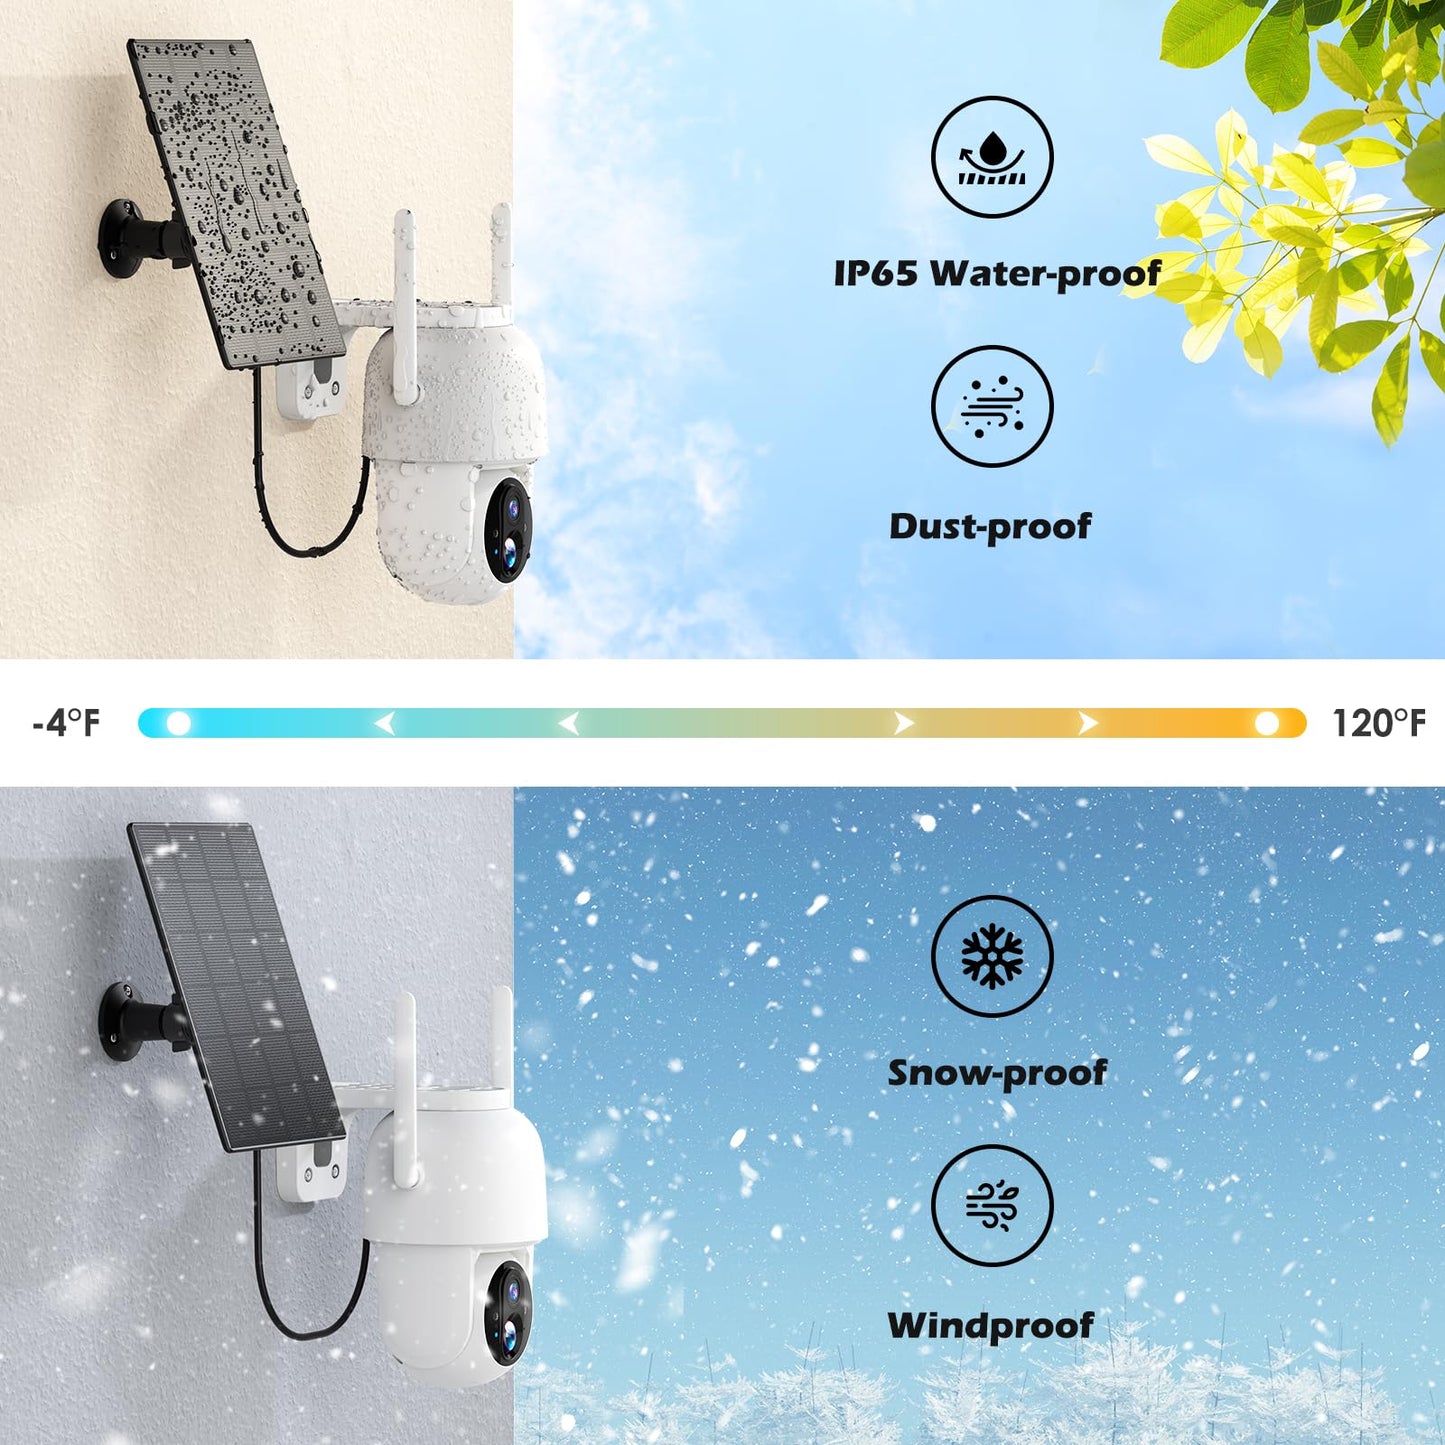 Allweviee Solar Security Cameras Wireless Outdoor, 2K 3MP Pan Tilt 355° View IP65 Waterproof Rechargeable Battery Powered PTZ WiFi Camera with PIR, Color Night Vision,2-Way Talk,Cloud/SD